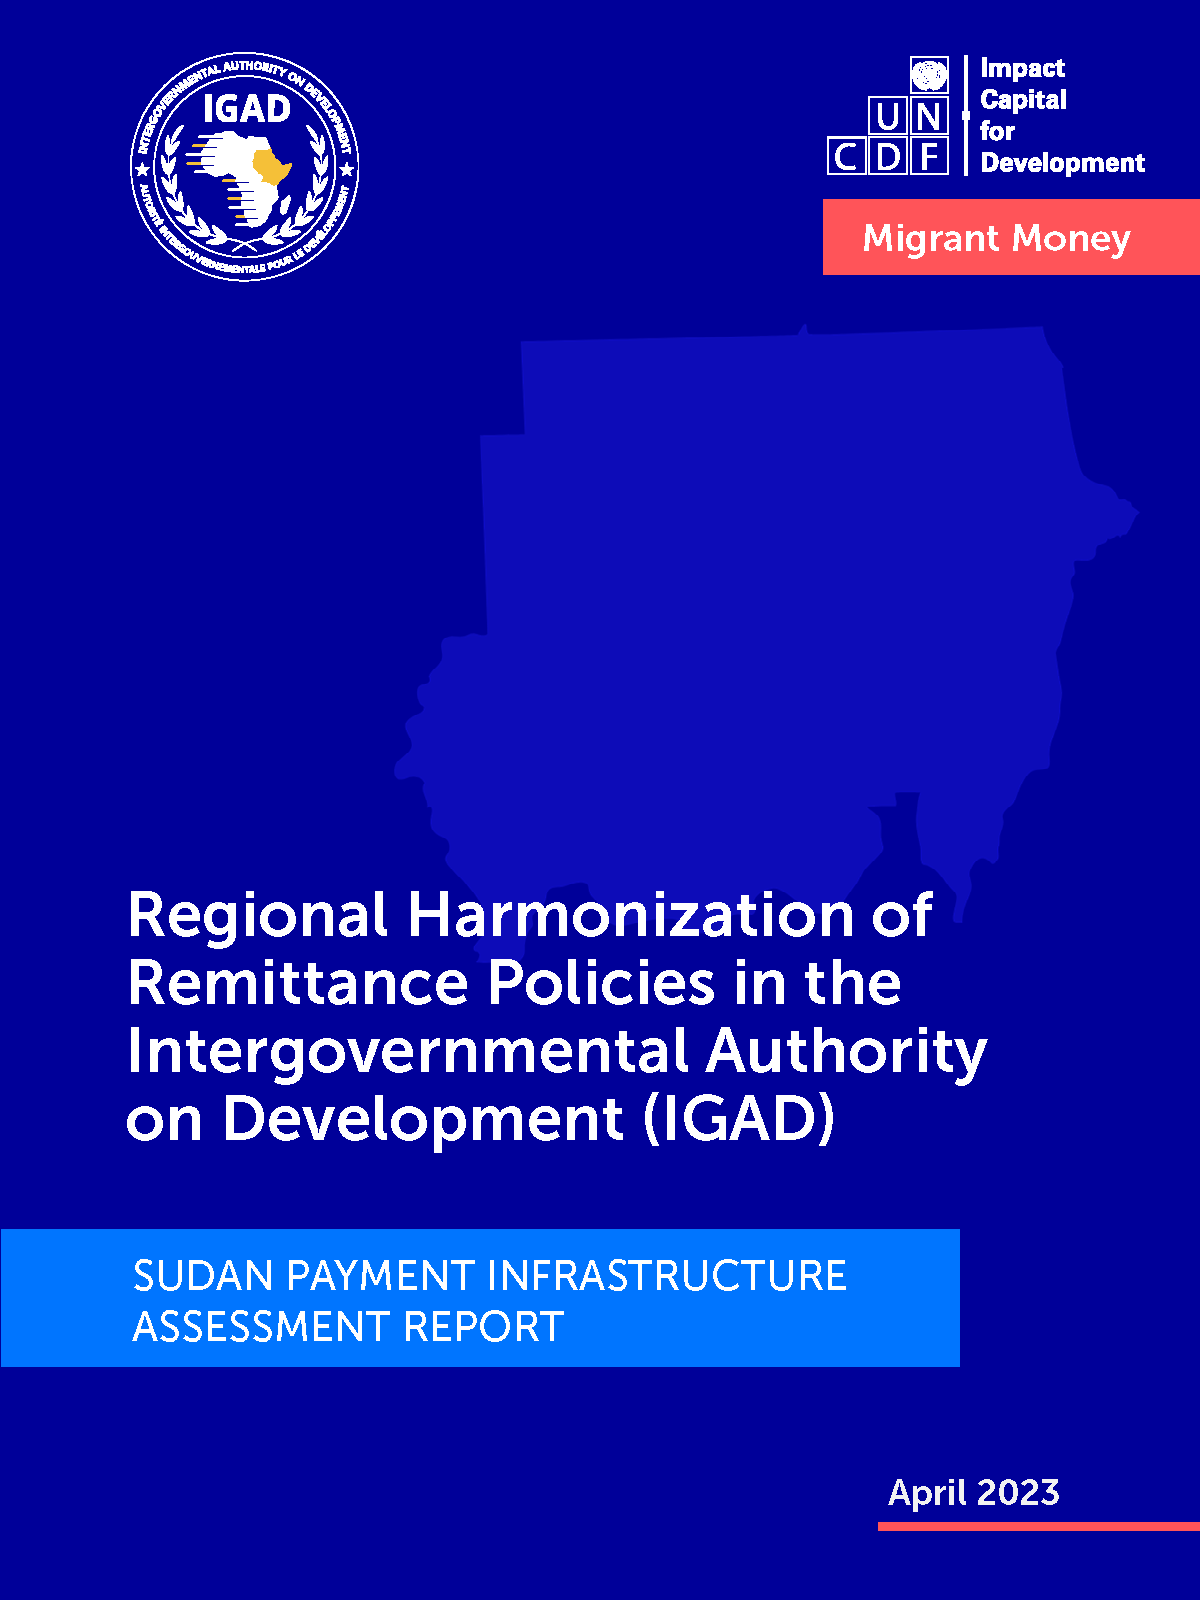 Sudan Payment Infrastructure Assessment Report: Regional Harmonization of Remittance Policies in IGAD